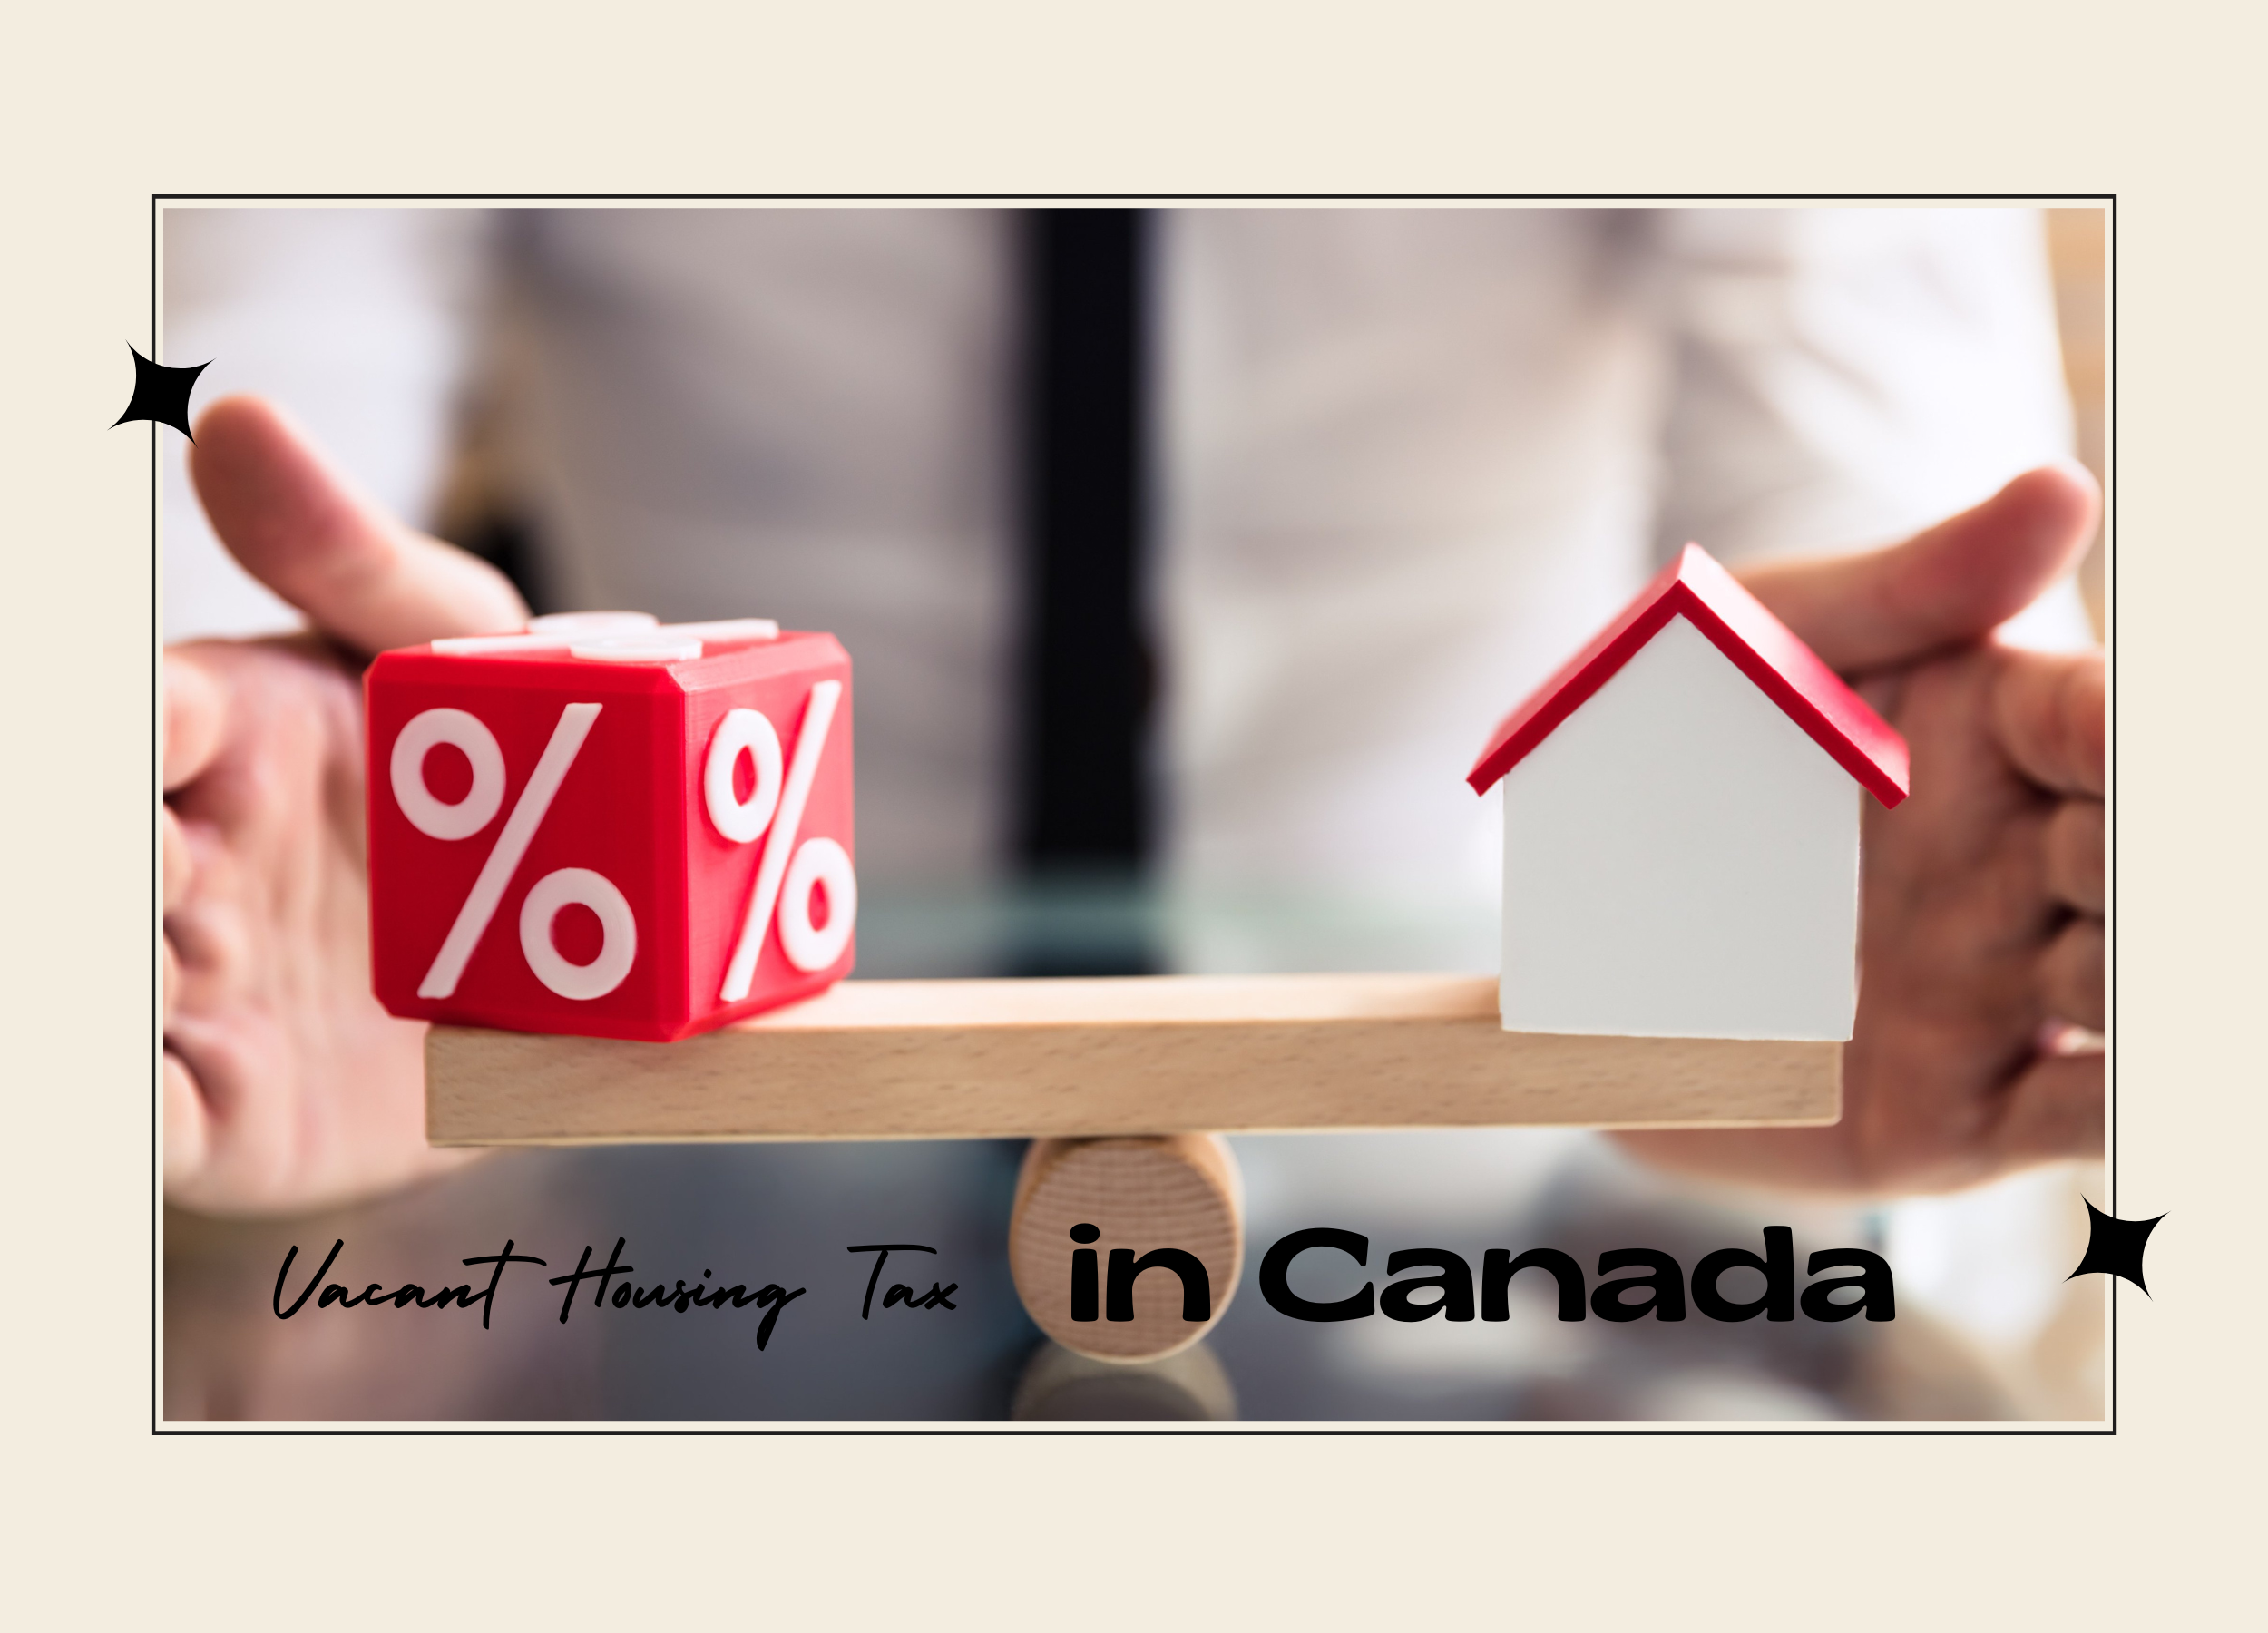 Vacant Housing Tax in Canada